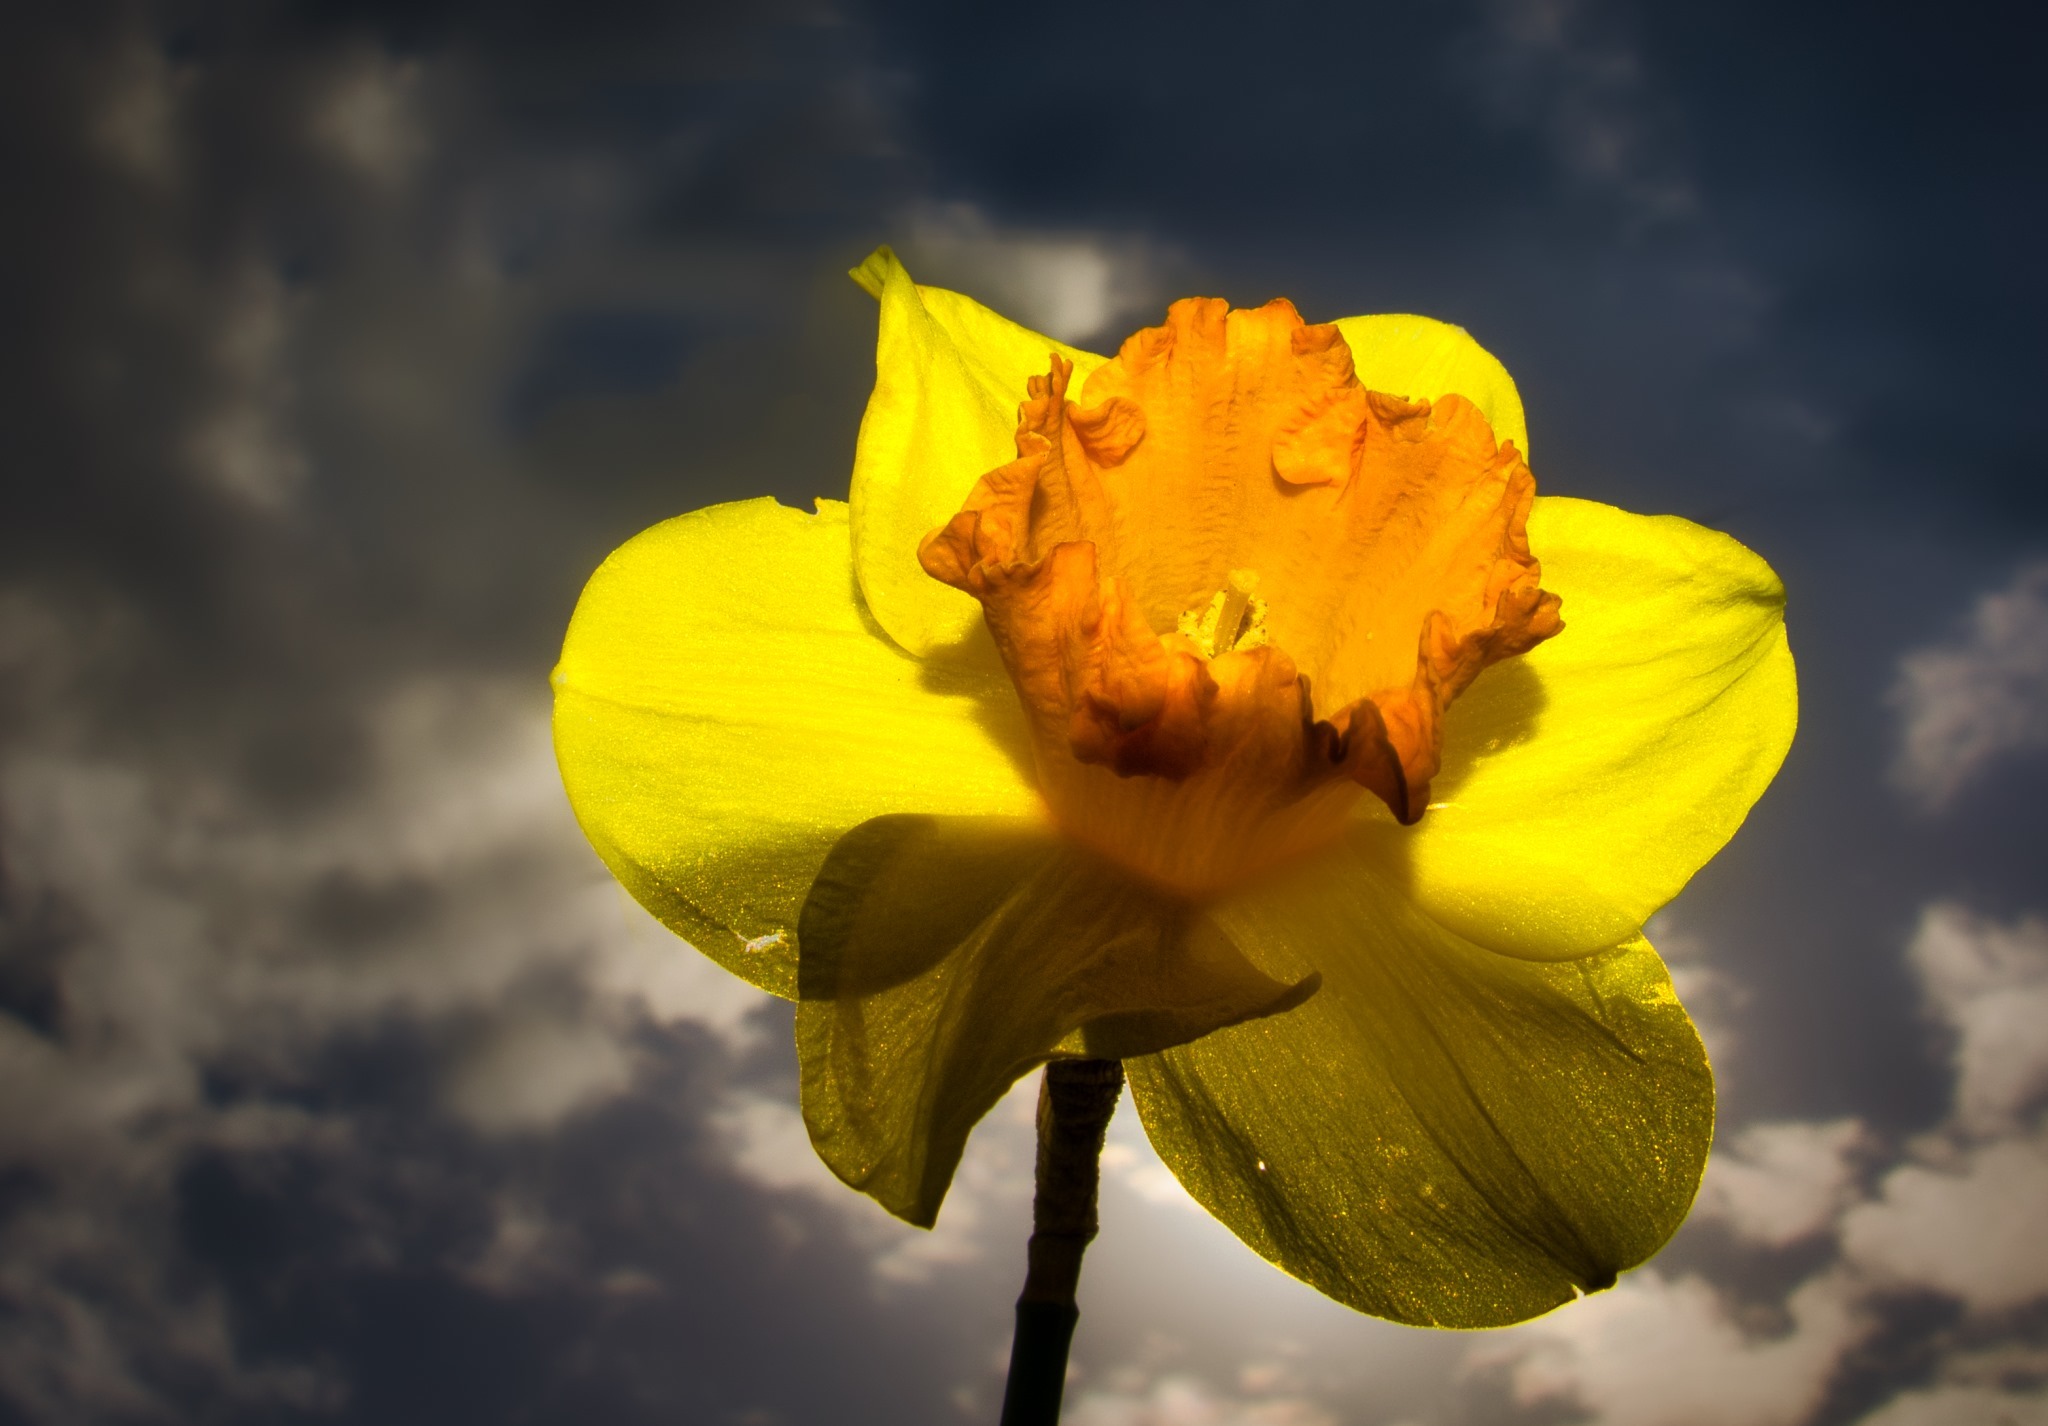 Spring has sprung, by David ONeill